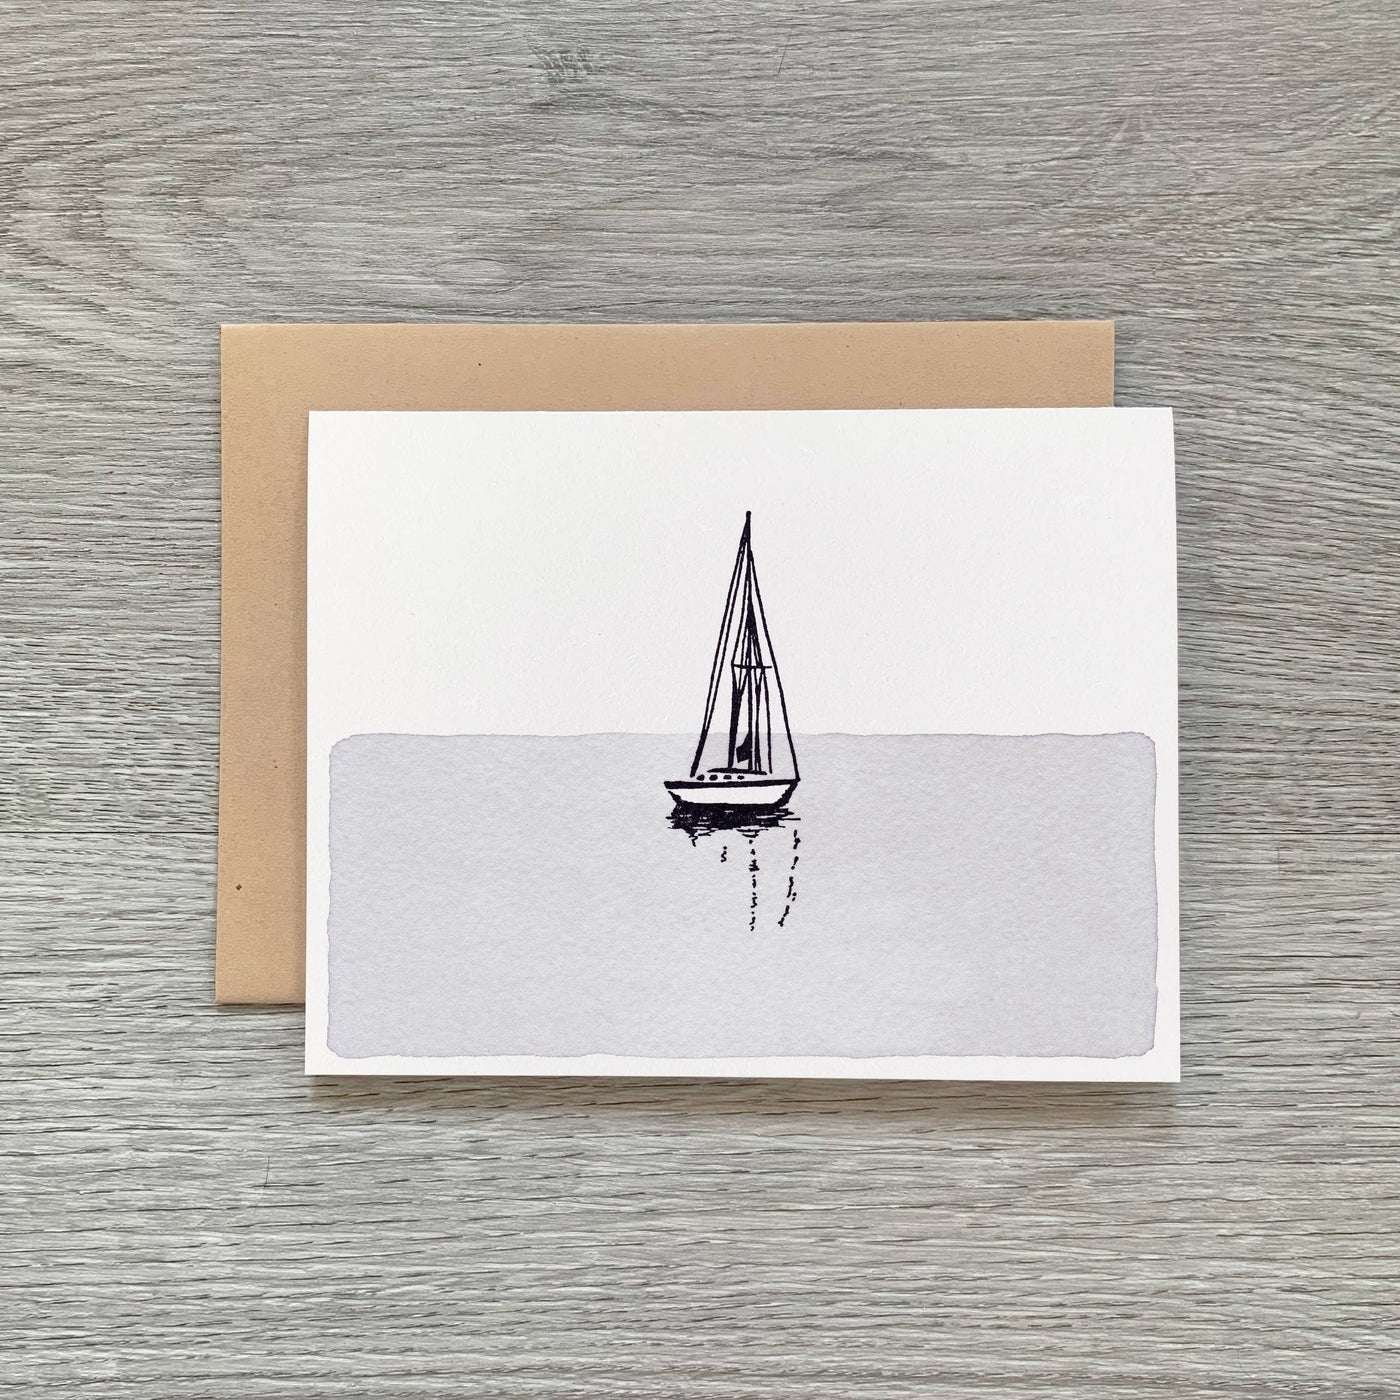 Sailboat in Water Card